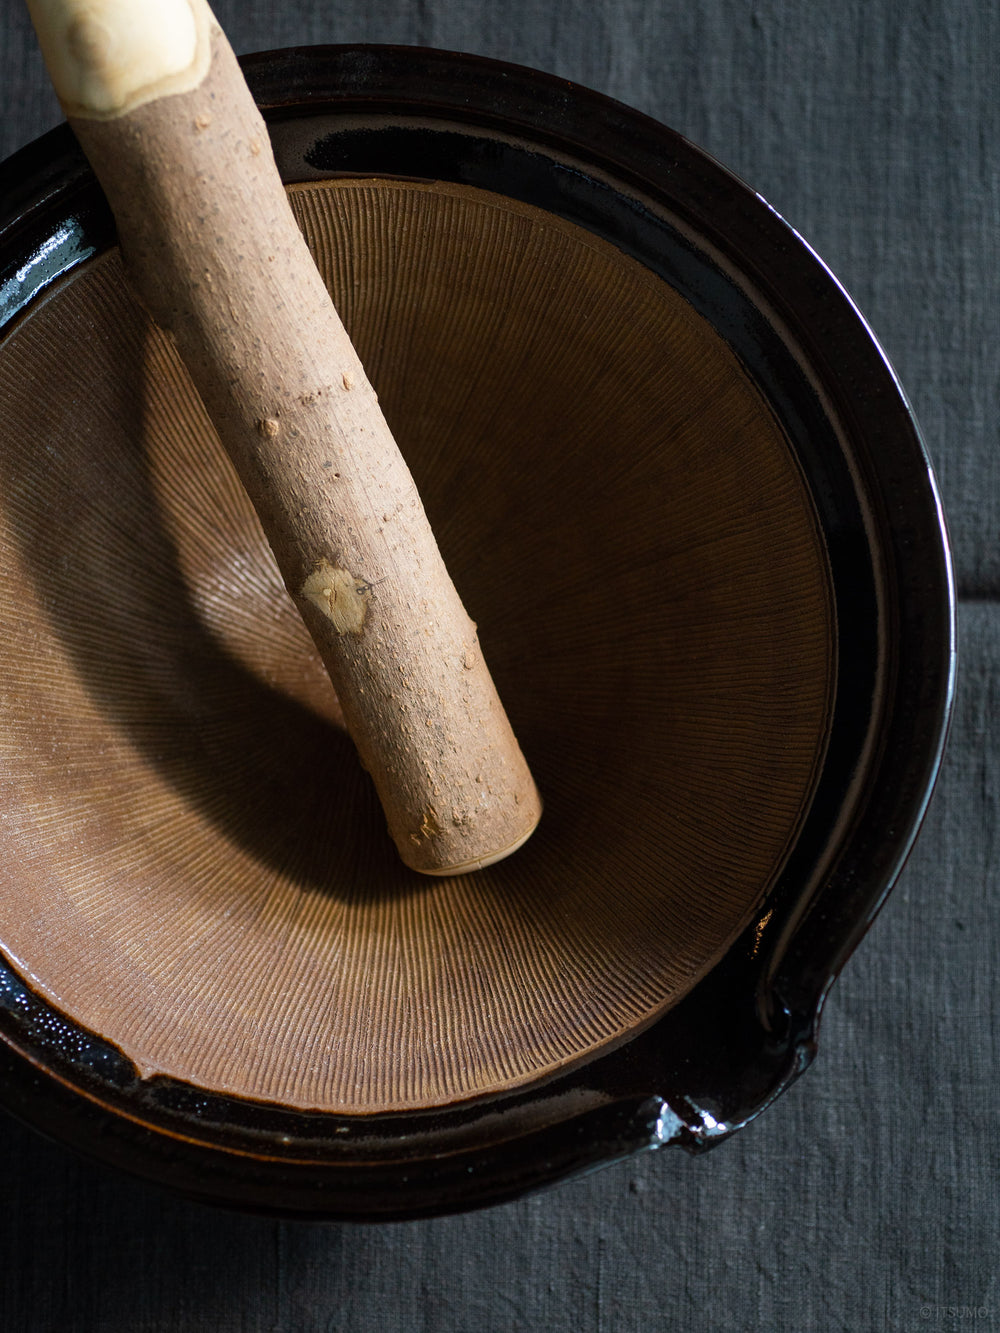 Azmaya's extra large iga suribachi mortar showing a textured ceramic inside and a wooden pestle leaning against the side